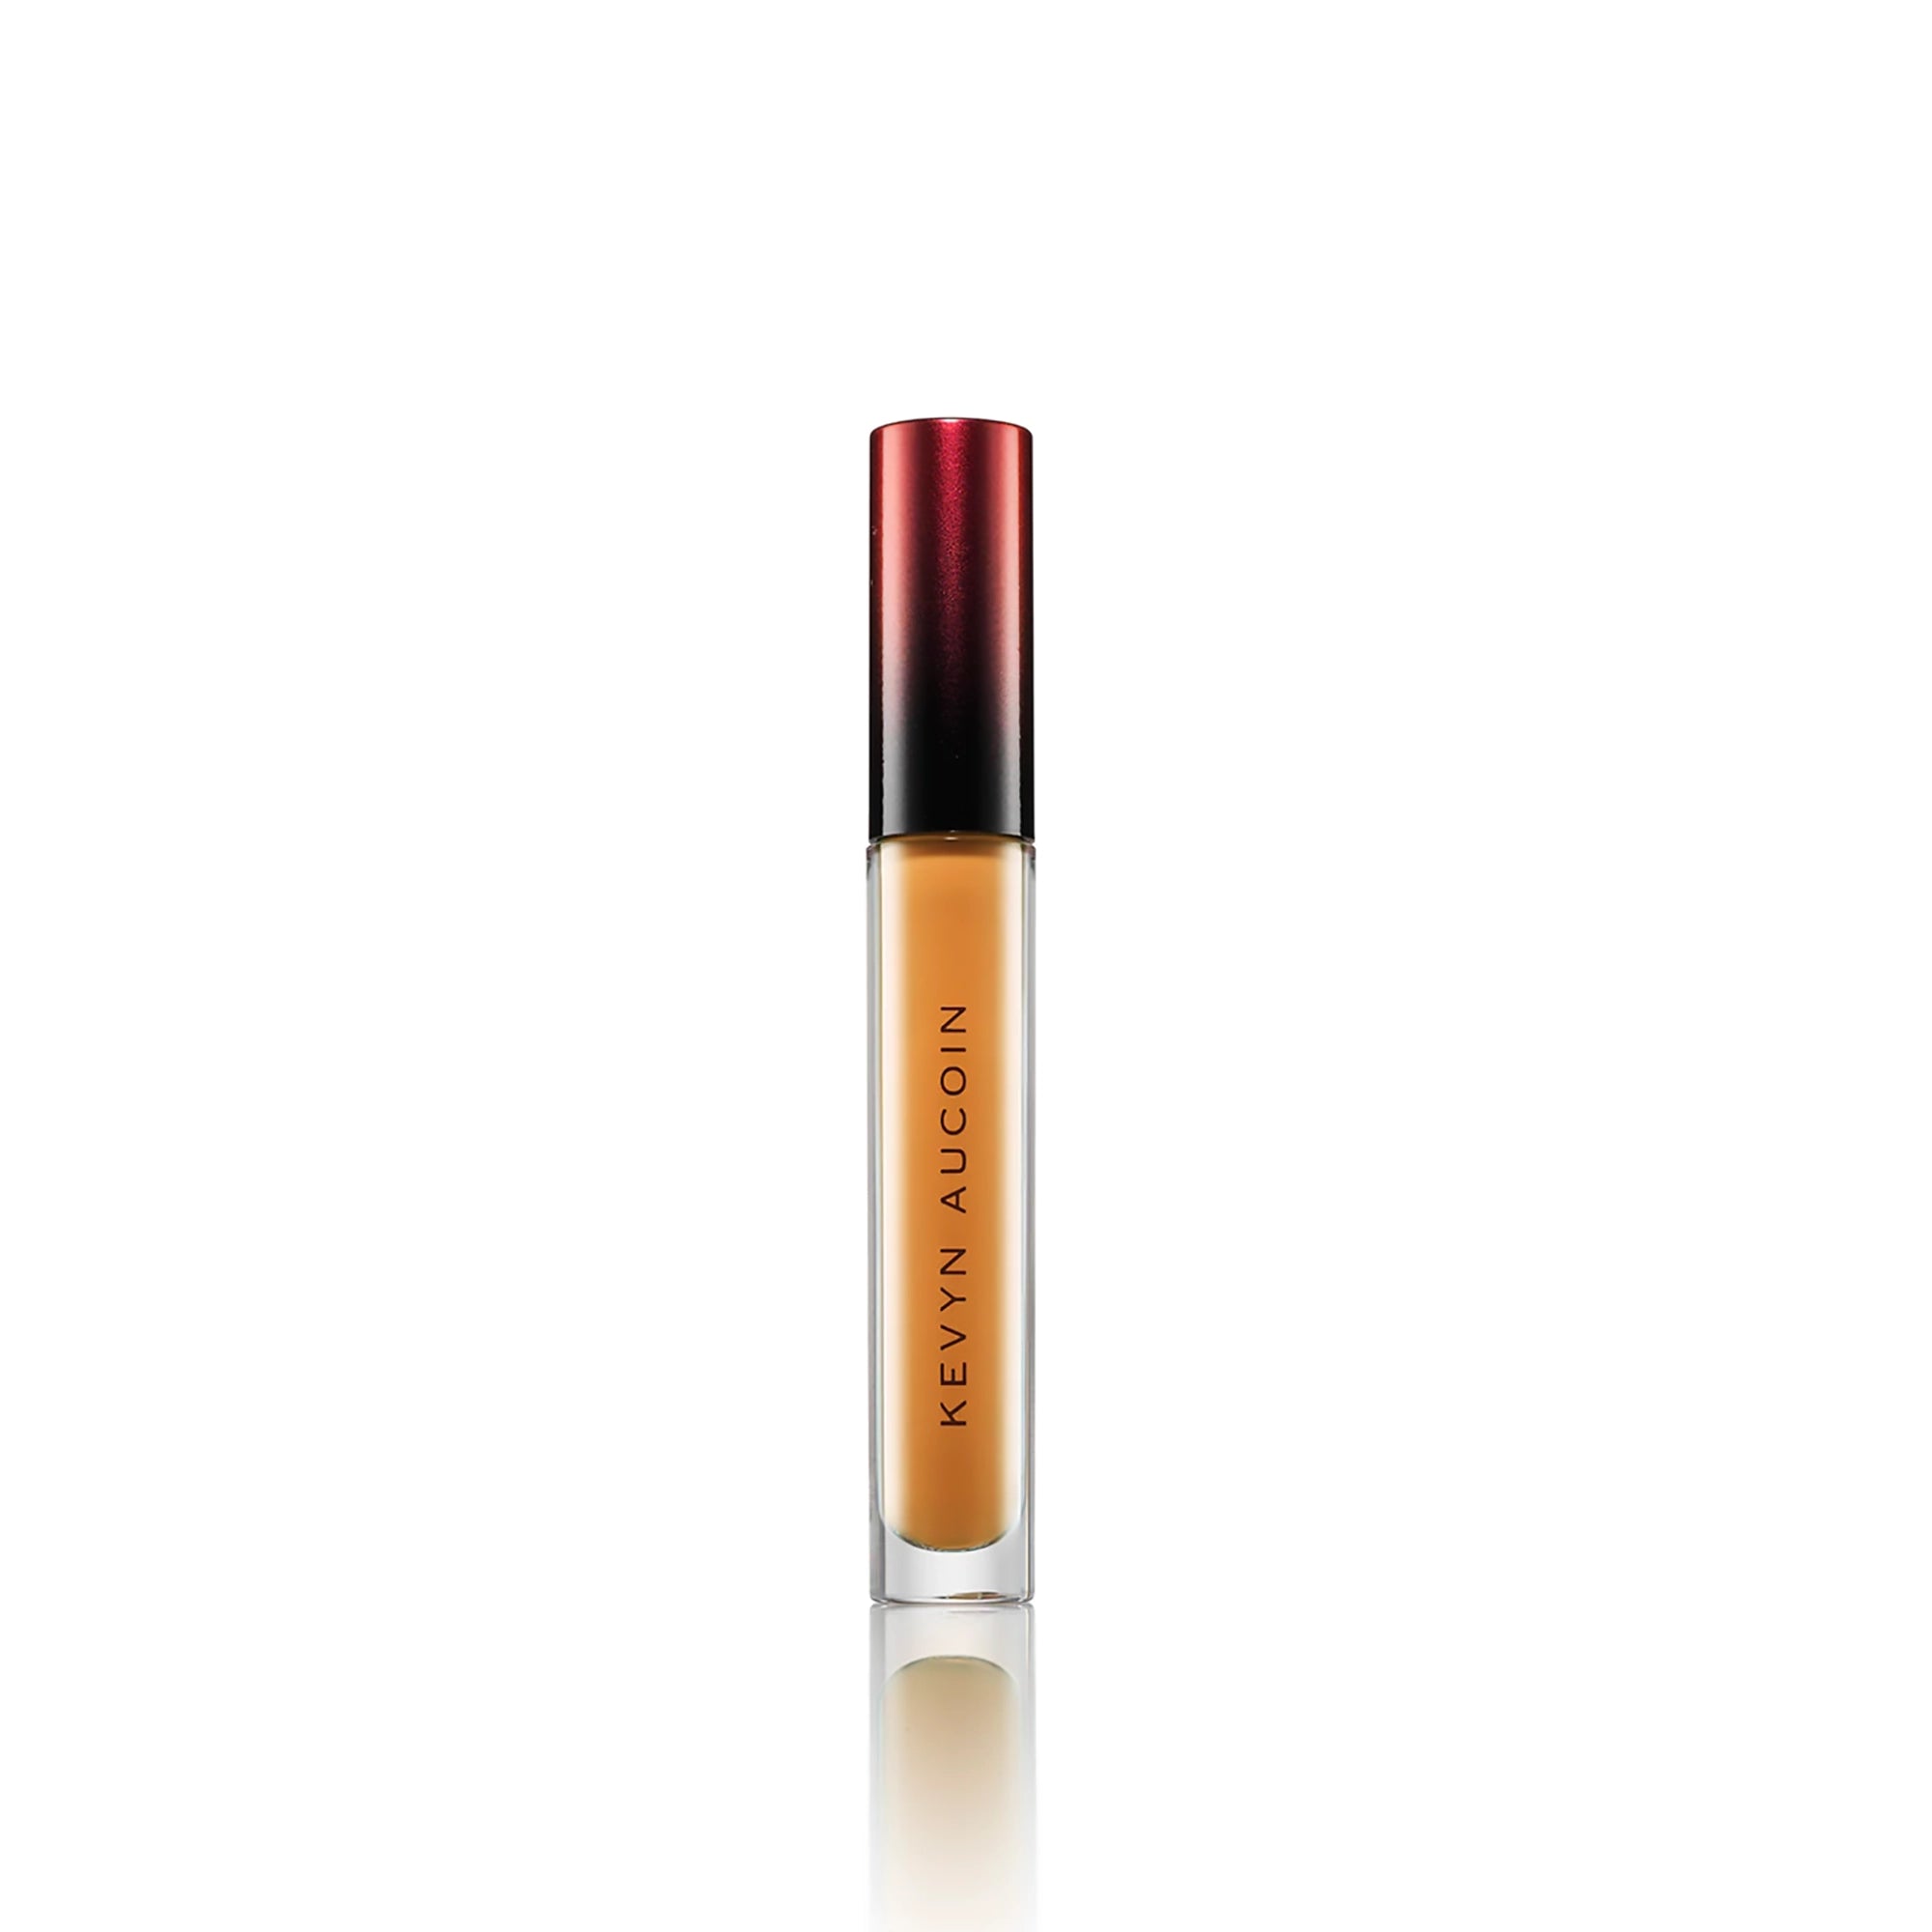 Kevyn Aucoin The Etherealist Super Natural Concealer / DEEP 8